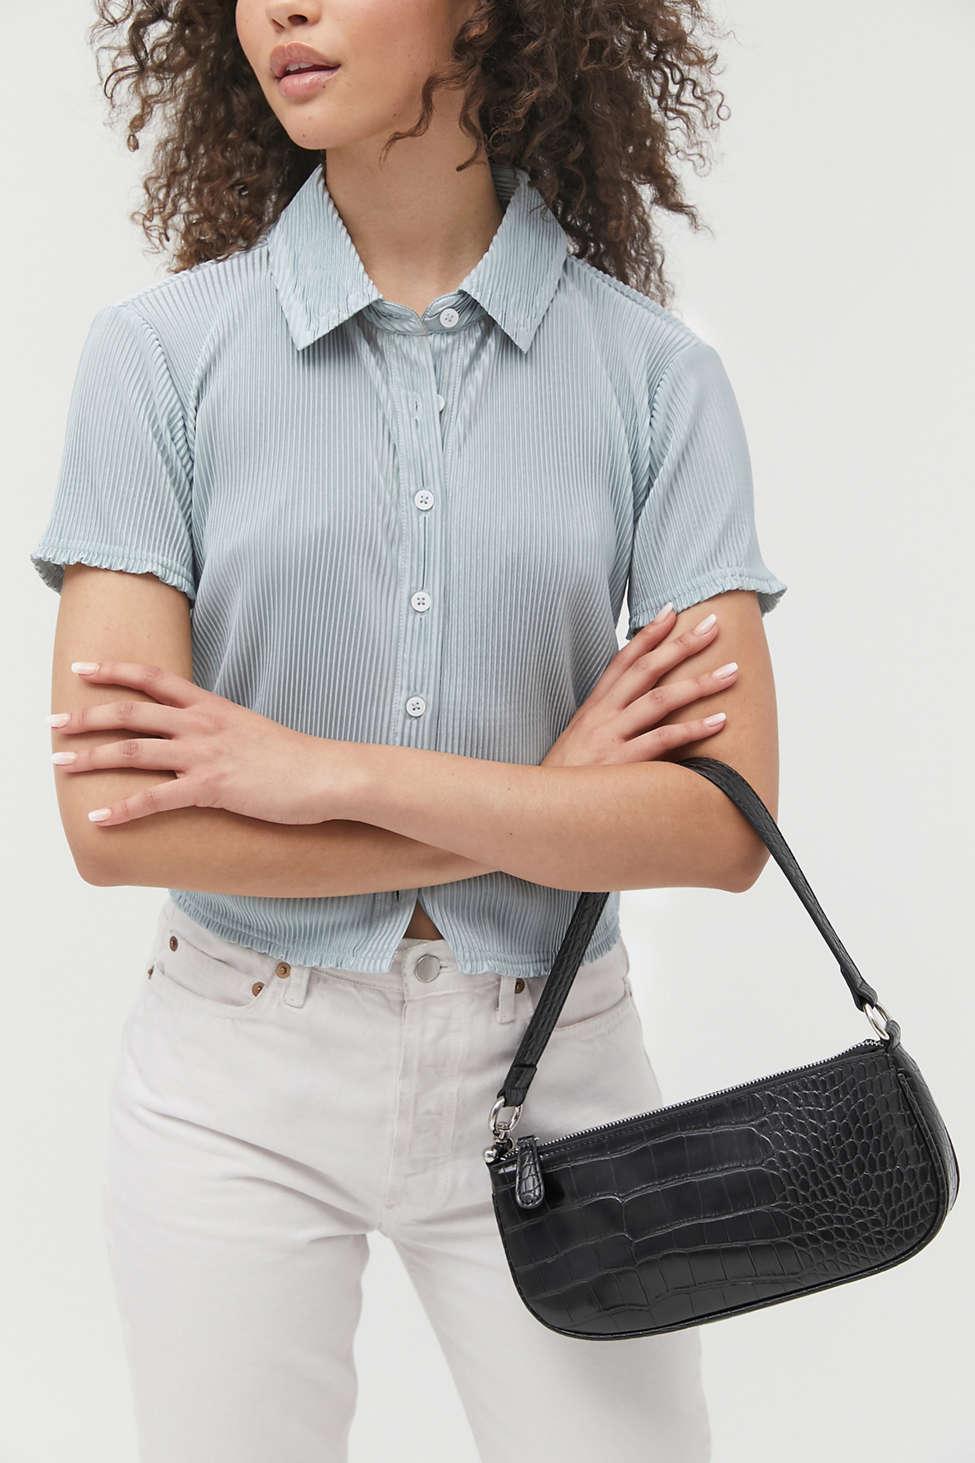 Urban Outfitters Uo Croc Baguette Bag in Black | Lyst